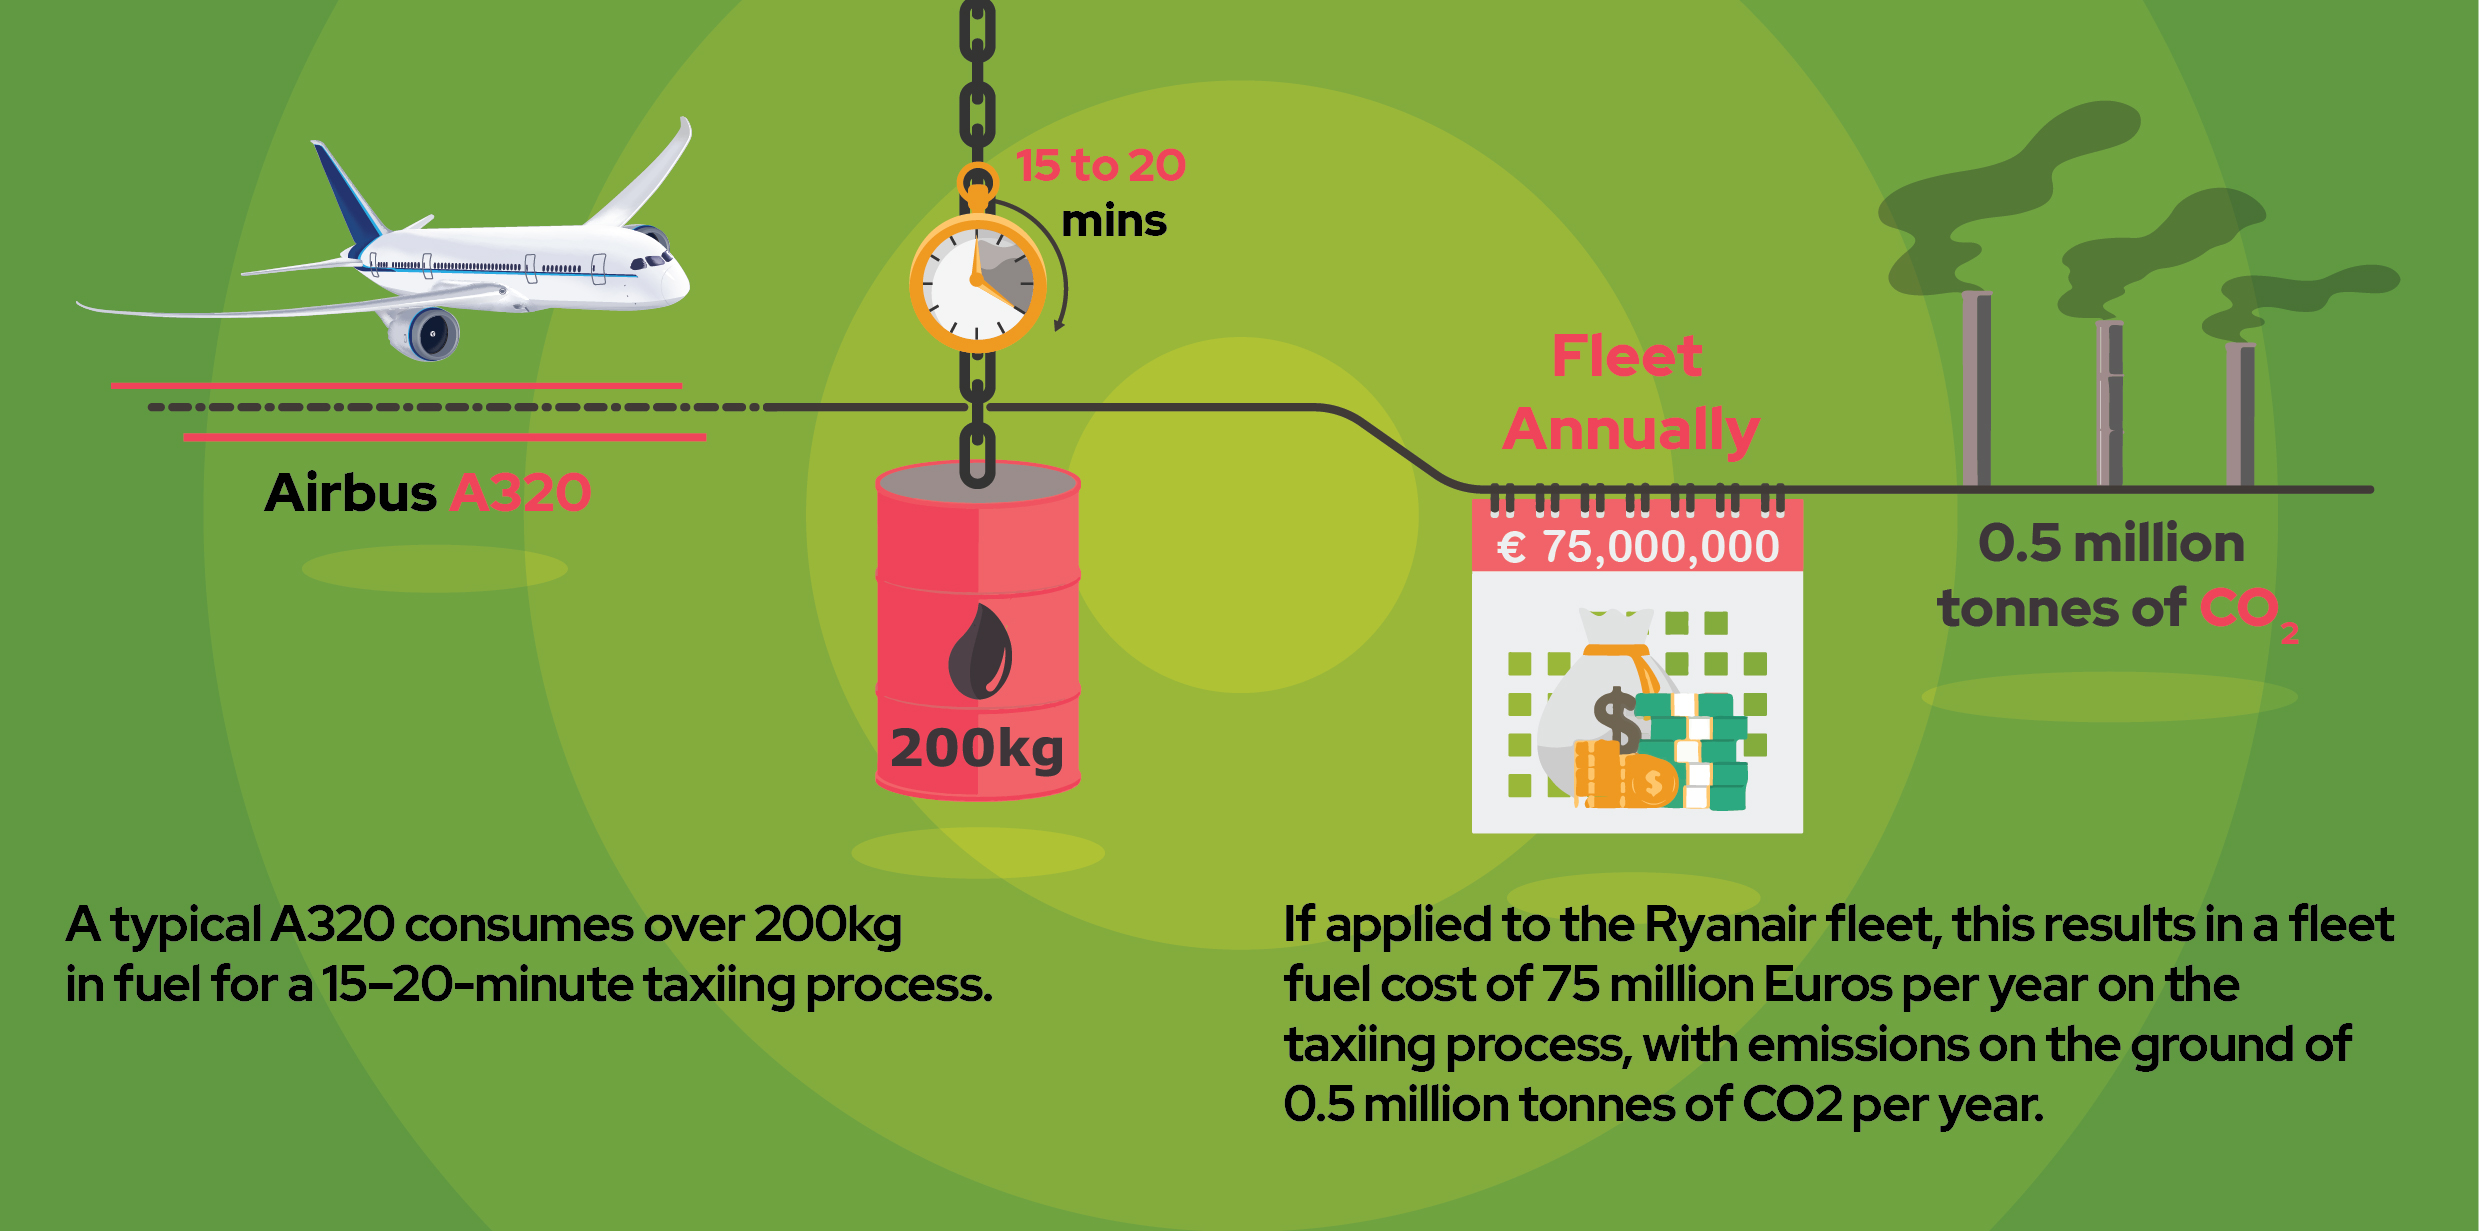 Aircraft taxiing has consequences on the CO2 emissions and fuel costs.